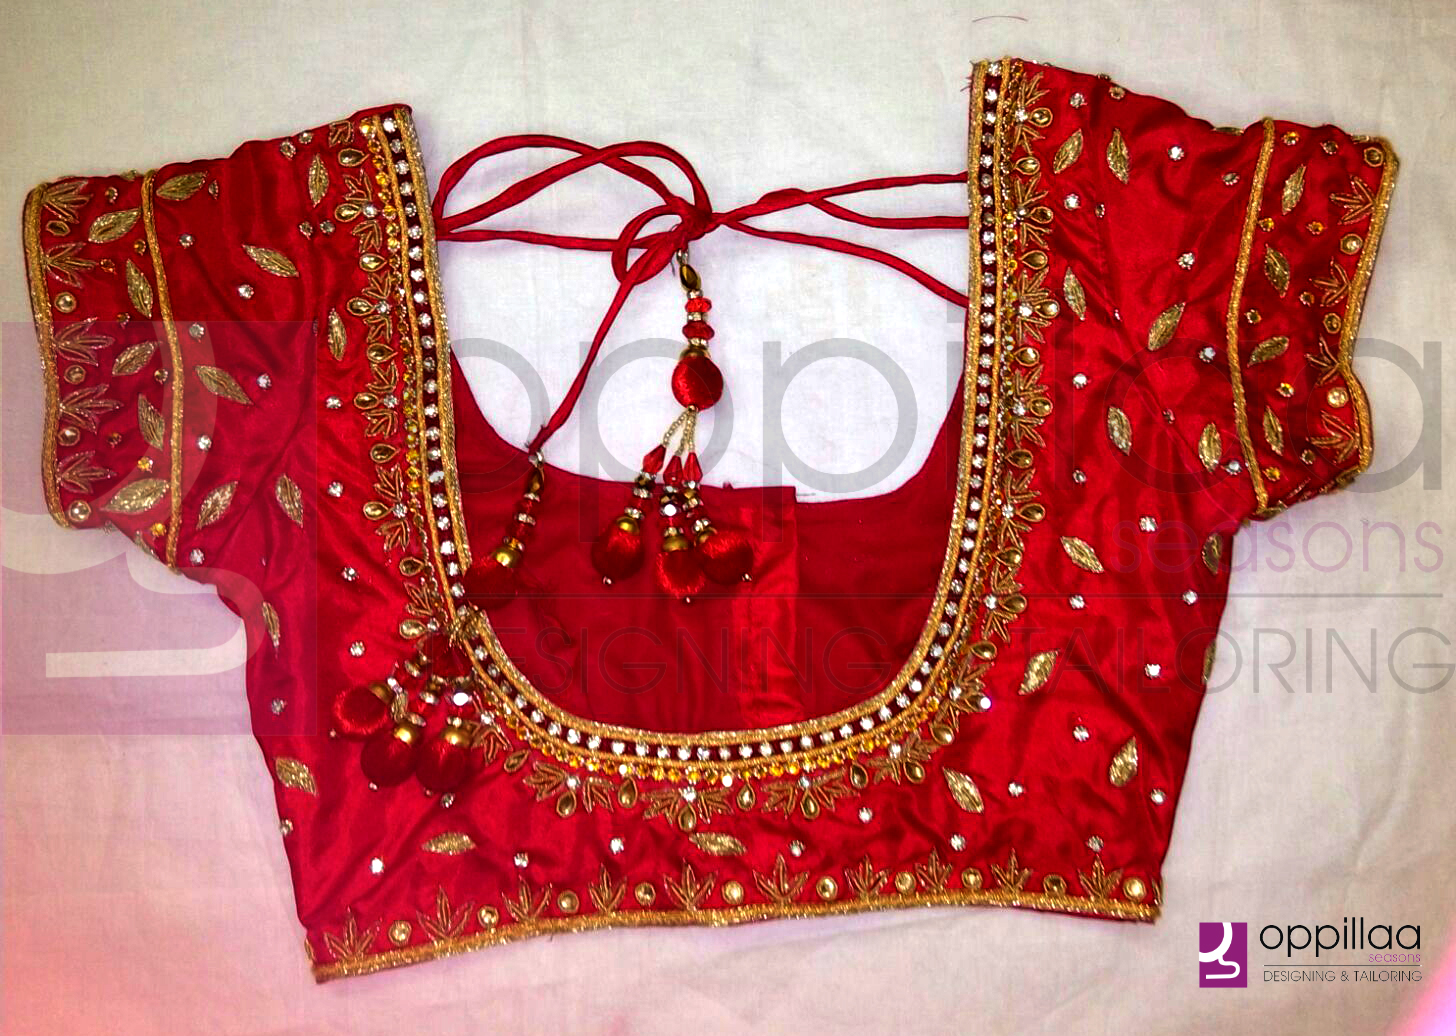 Ladies Tailor in Chennai: South Indian Bridal Blouse Designs - 1